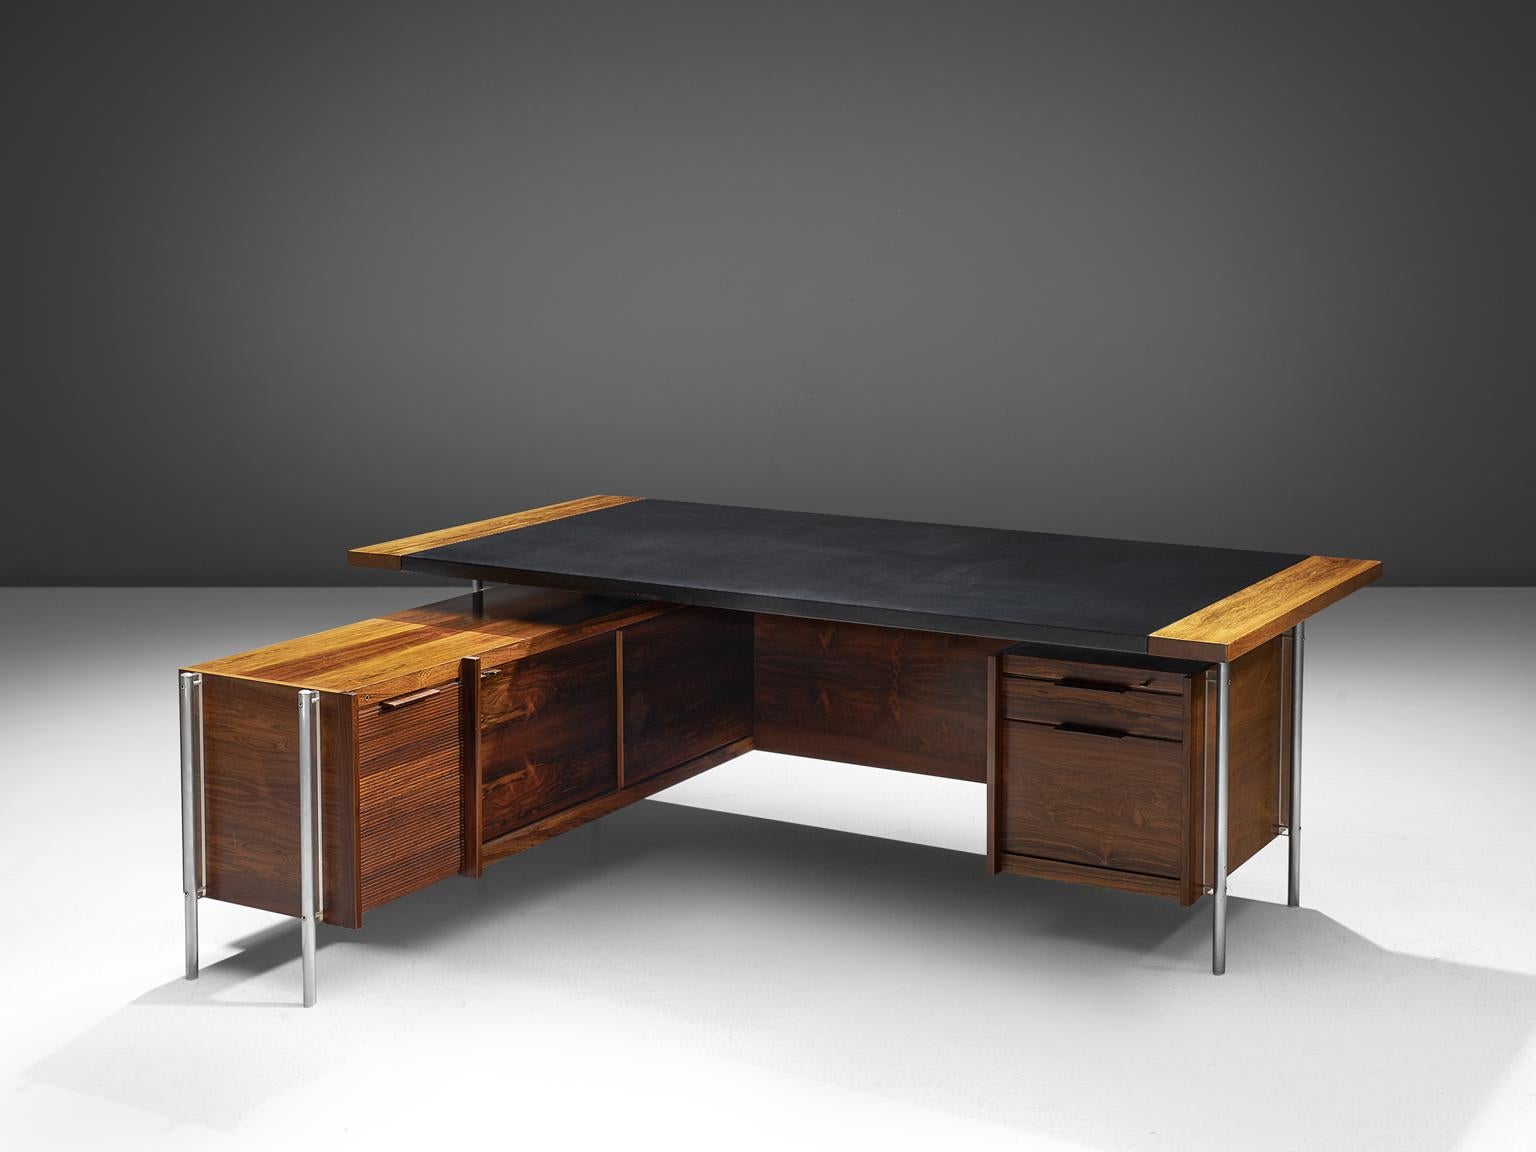 Sven Ivar Dysthe for Dokke Møbler, corner desk, black leather, steel, rosewood, Norway, circa 1959. 

The base of this desk is made out of rosewood and stainless steel pieces and black leather on the tabletop. The combination of the rosewood, the